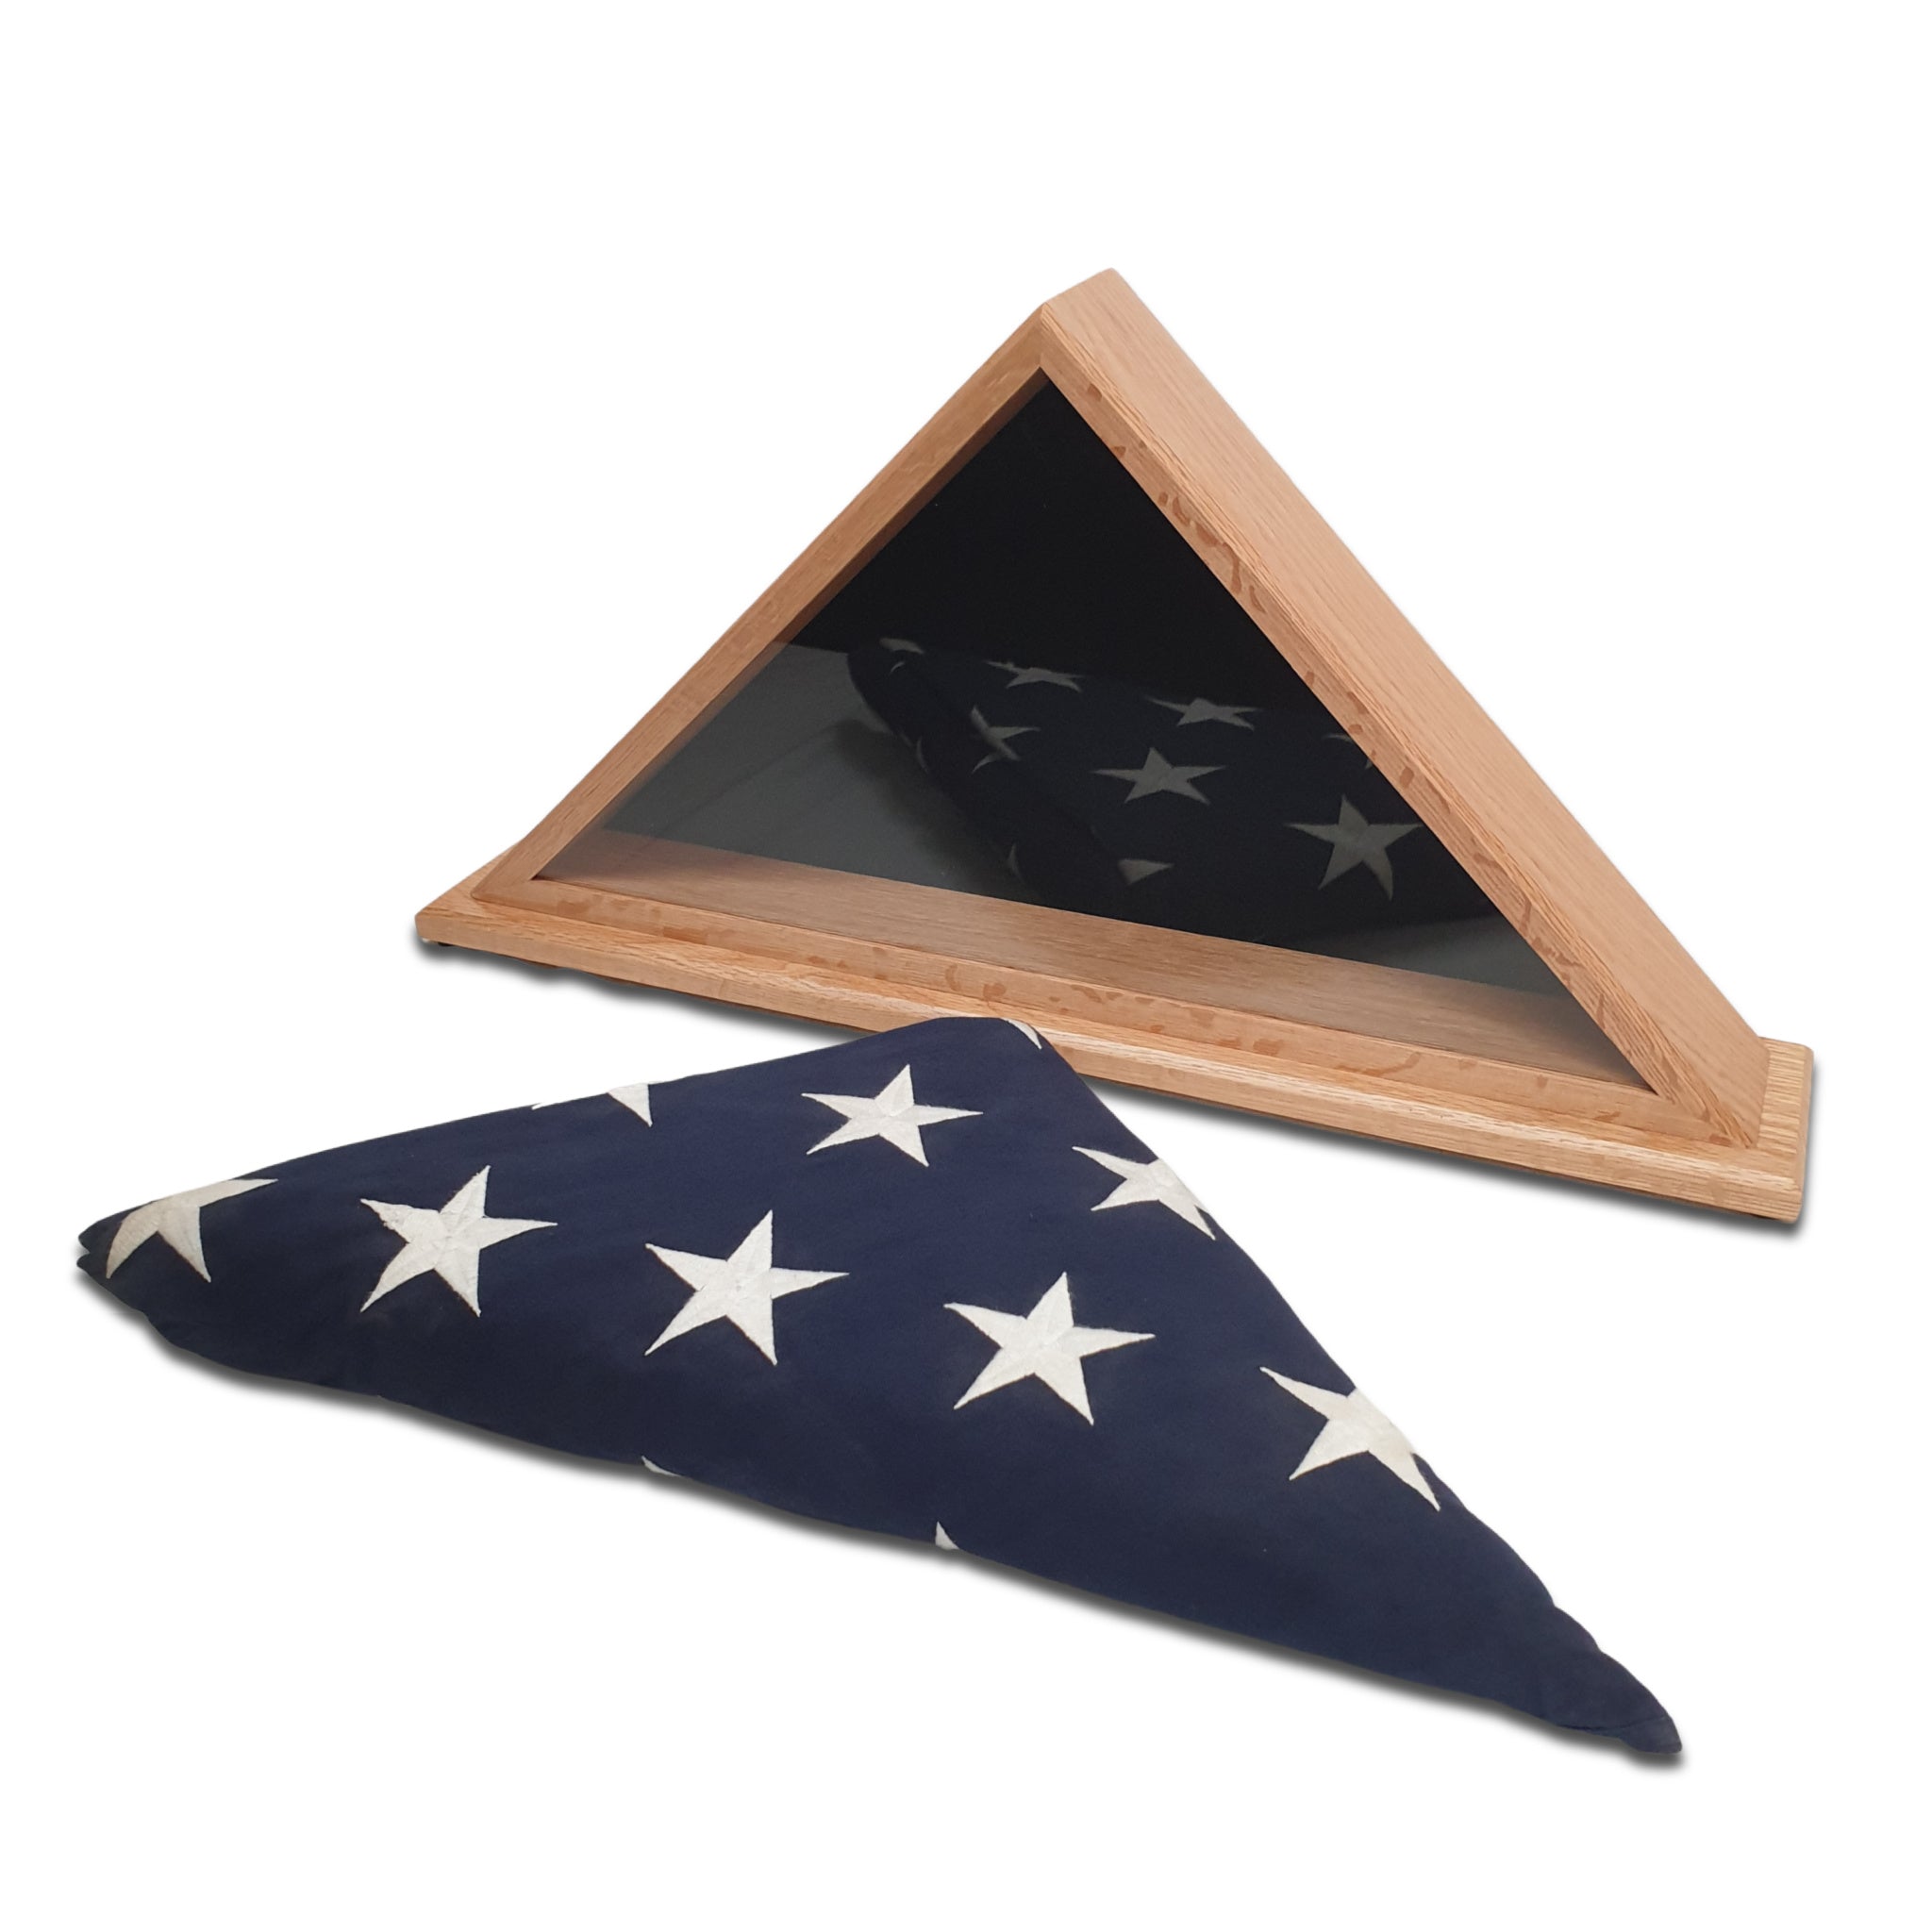 Burial Memorial Flag Display Case for deceased Veteran. Holds one folded 5' by 9.5' burial flag. Made with real Oak hardwood. American Made - Veteran Built™ Shown with 5'x9.5' Burial  Internment Flag.